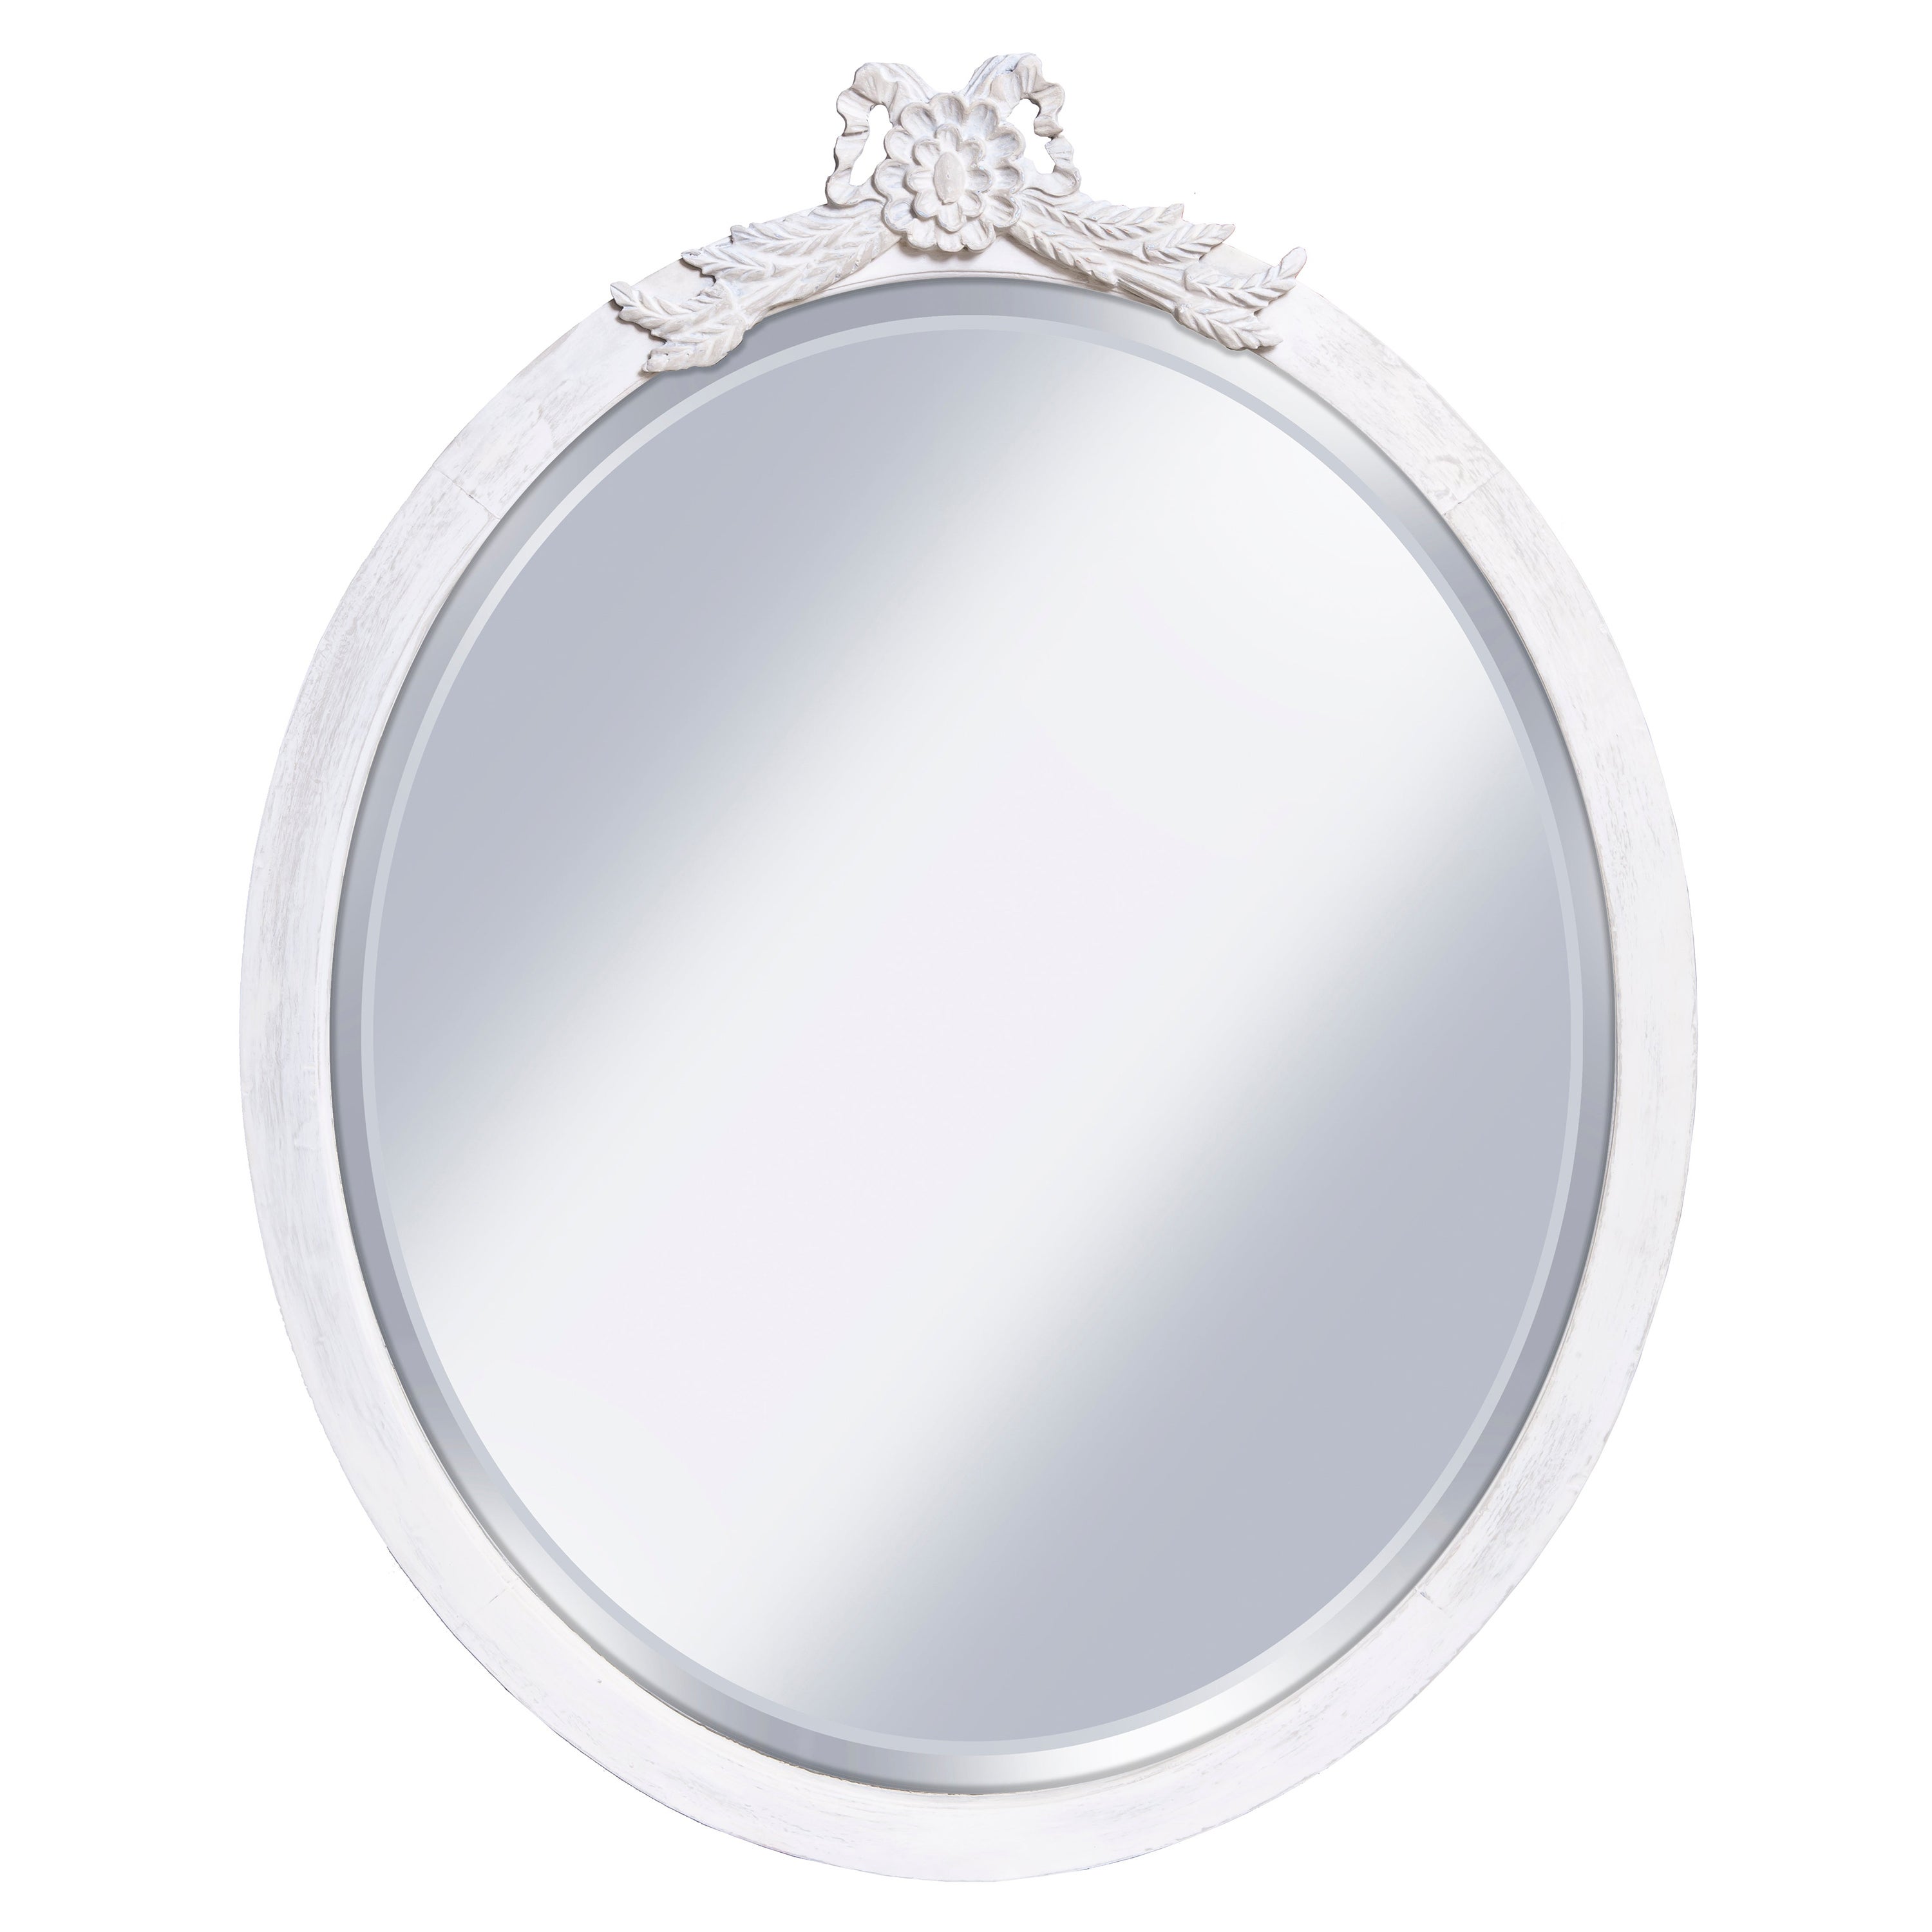 Hand Carved & Hand-Cut Large Oval Beveled Mirror